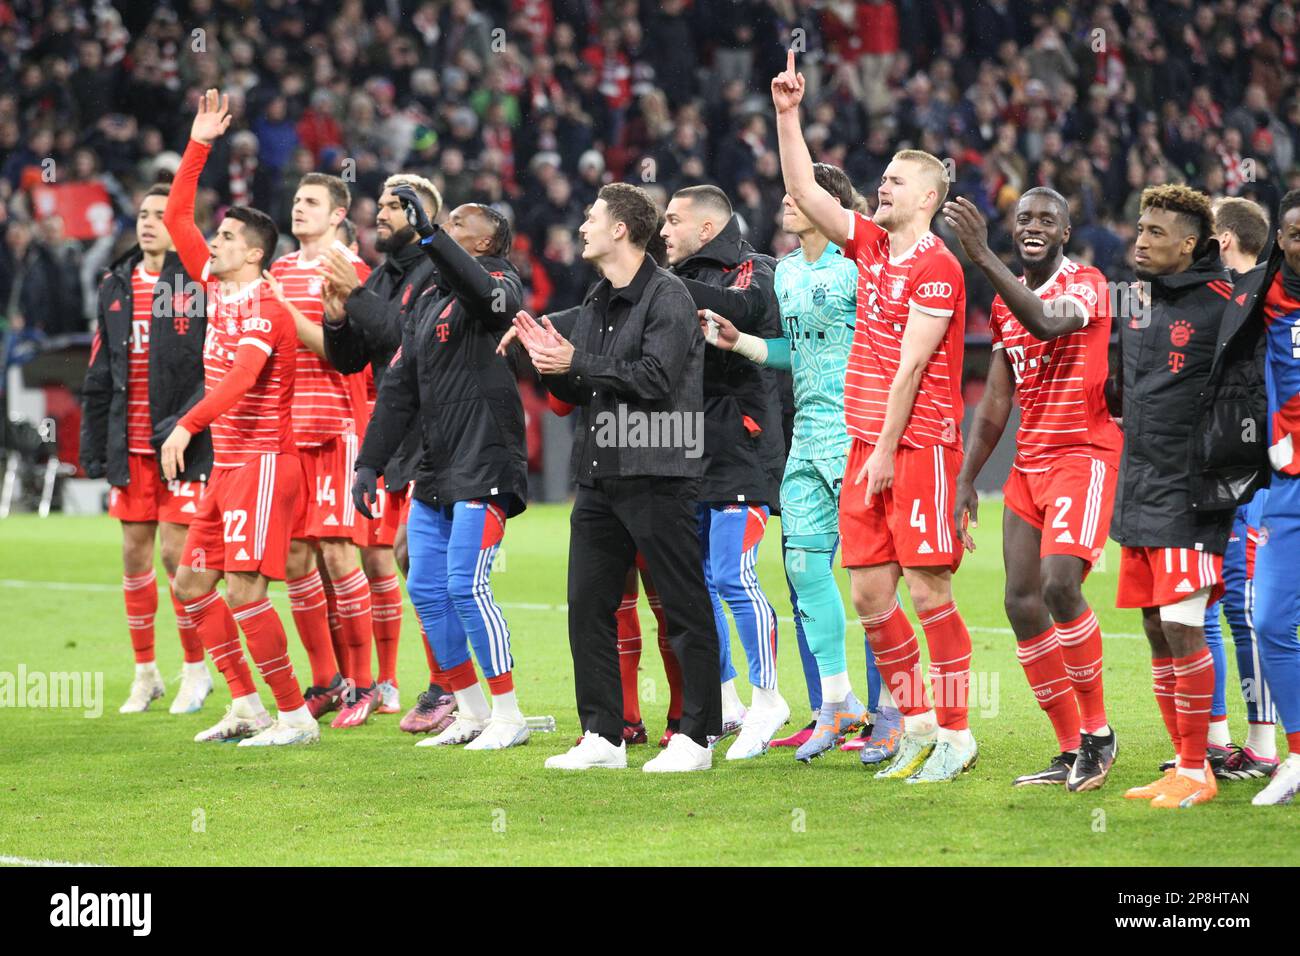 Munich, Germany 08. March 2023: Fc Bayern players celebrate their victory over PSG, 1 Yann SOMMER, 2 Dayot Upamecano, 4 Matthijs de Ligt, 6 Joshua Kimmich, 8 Leon Goretzka, 11 Kingsley Coman, 13 Eric Maxim Choupo-Moting, 19, Alphonso Davies, 25 Thomas Müller, Mueller, 42 Jamal Musiala, 44 Josip Stanisic, 7 Serge Gnabry, 17, Sadio MANÉ, FOOTBALL, UEFA CHAMPIONS LEAGUE, Fc Bayern Muenchen vs PSG, Paris Saint Germain, Round of 16 2nd leg on Wednesday 8. March 2023 in Munich at the Allianz Arena football stadium, result 2:0, (Photo by © Arthur THILL/ATPimages) (THILL Arthur/ATP/SPP) Stock Photo